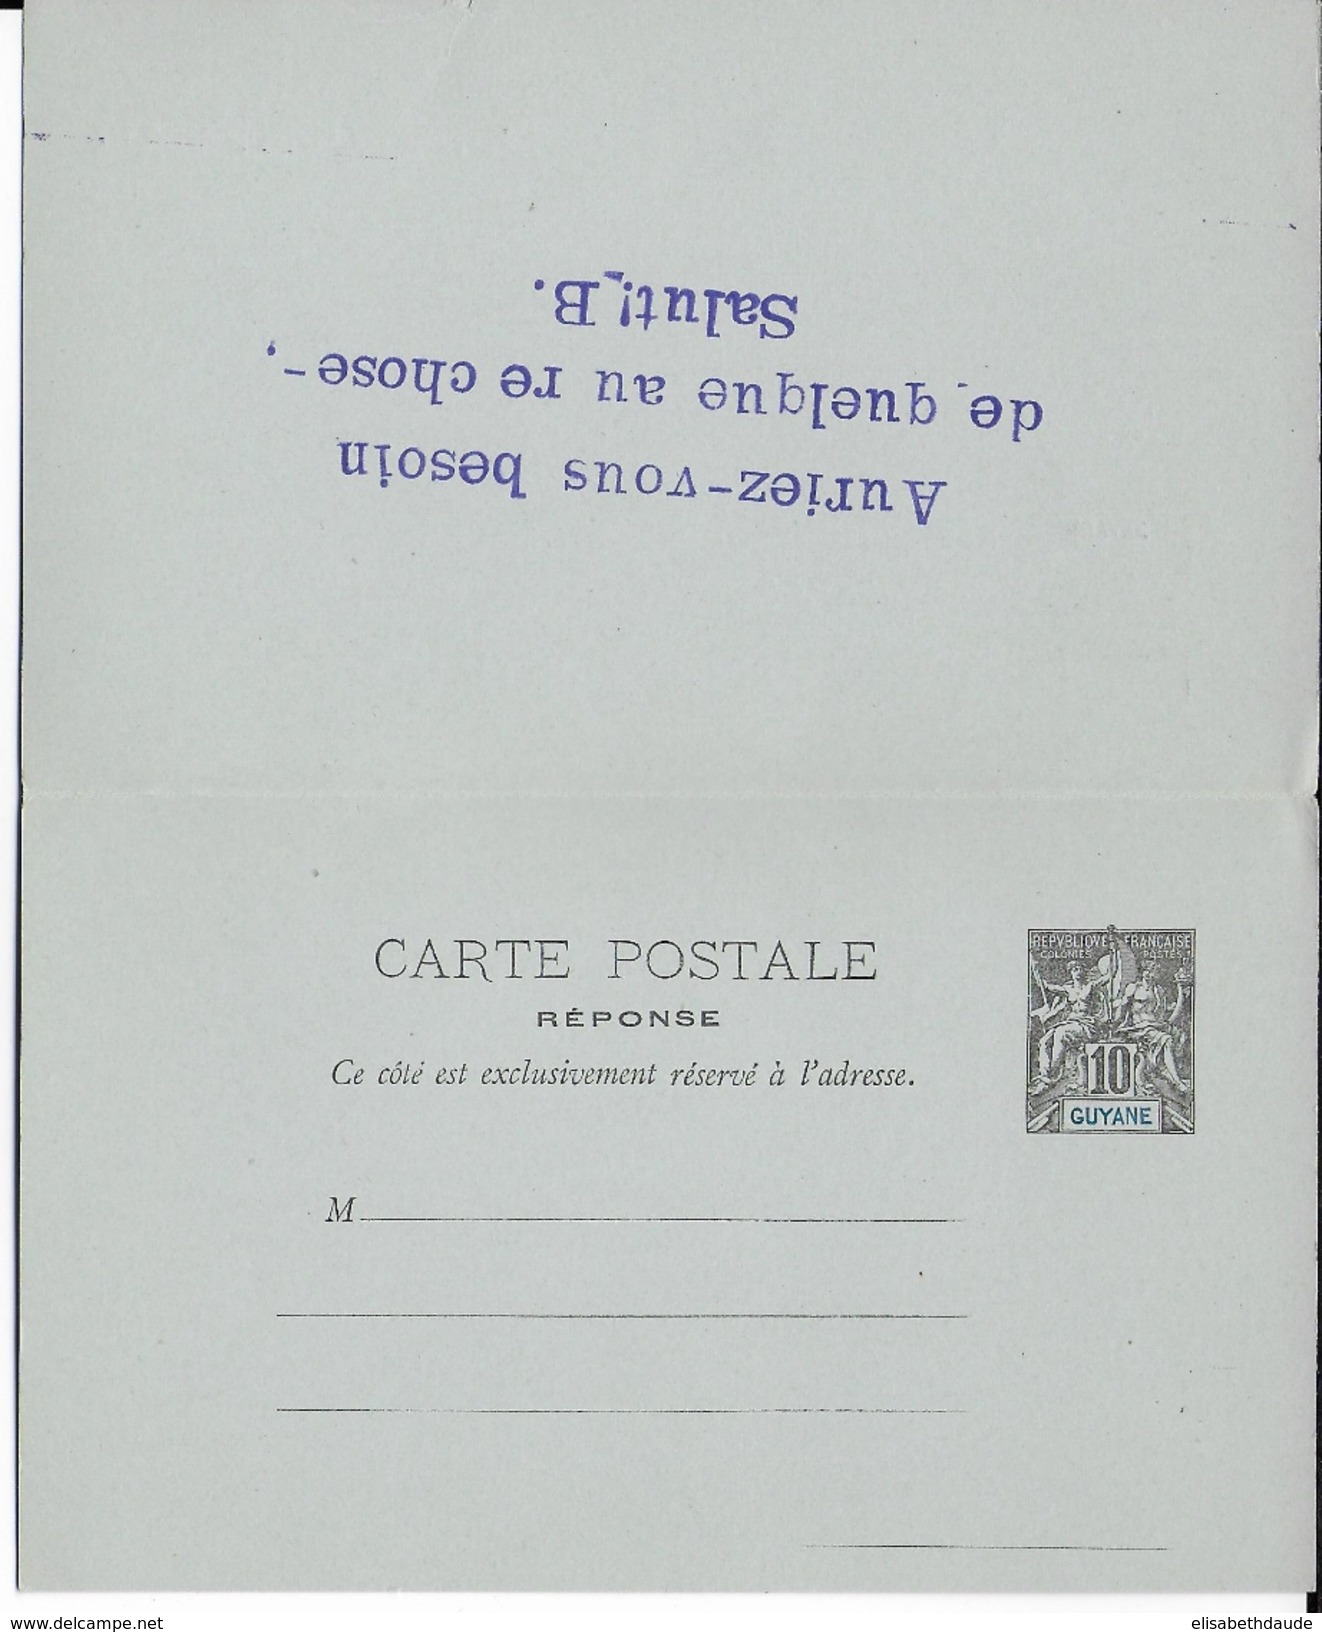 GUYANE - 1898 - CARTE ENTIER TYPE GROUPE Avec REPONSE PAYEE 140X87 De CAYENNE => OPPELN (SILESIE ALLEMANDE) - Covers & Documents